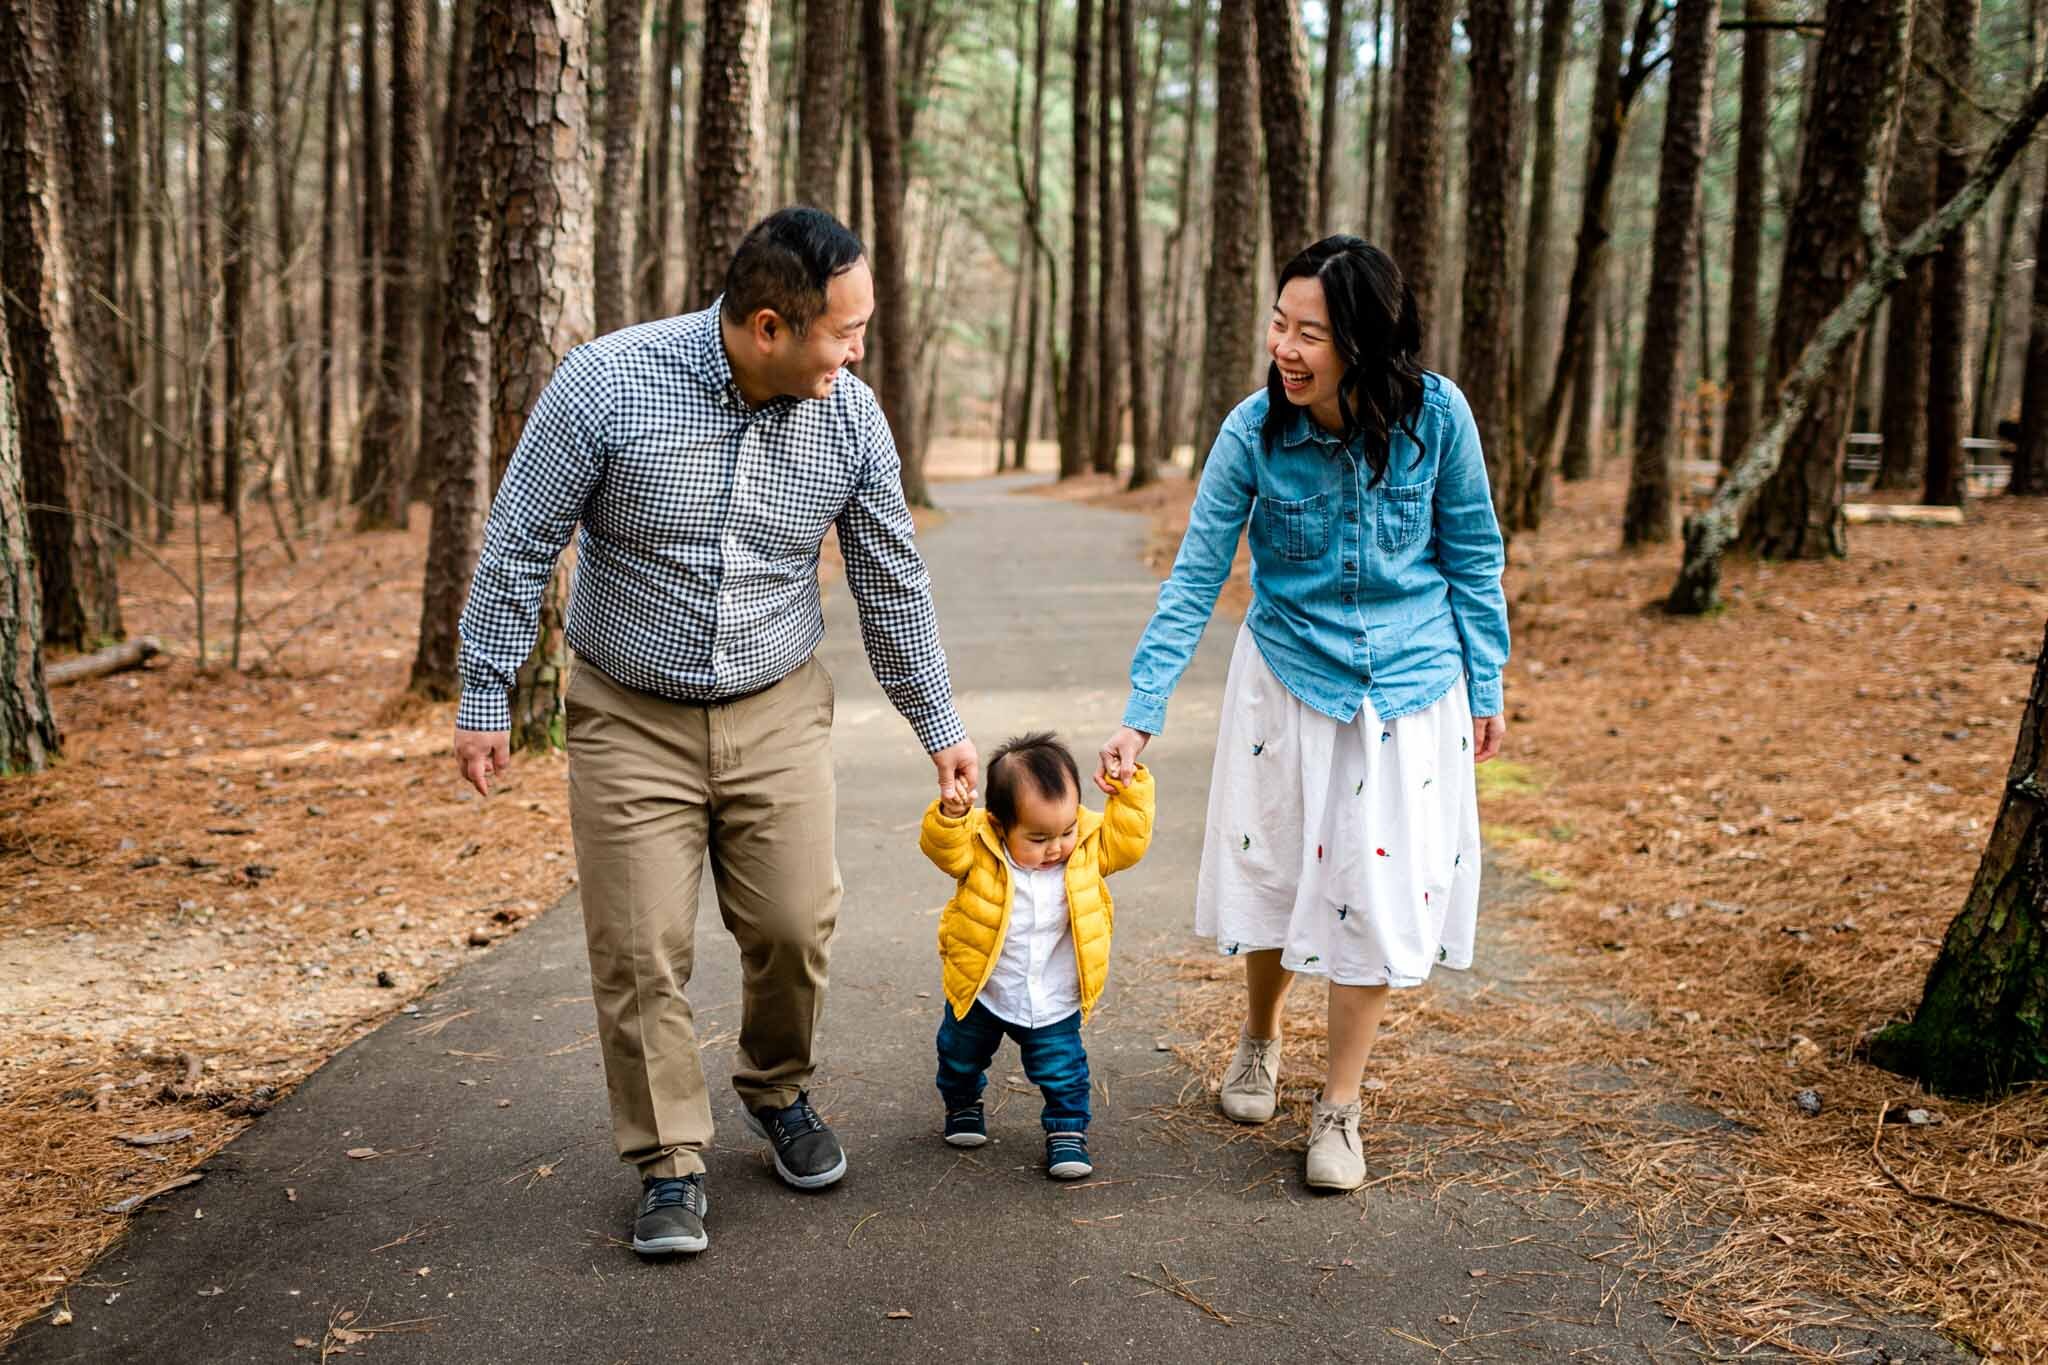 Raleigh Family Photographer | By G. Lin Photography | Umstead Park | Family walking together in forest